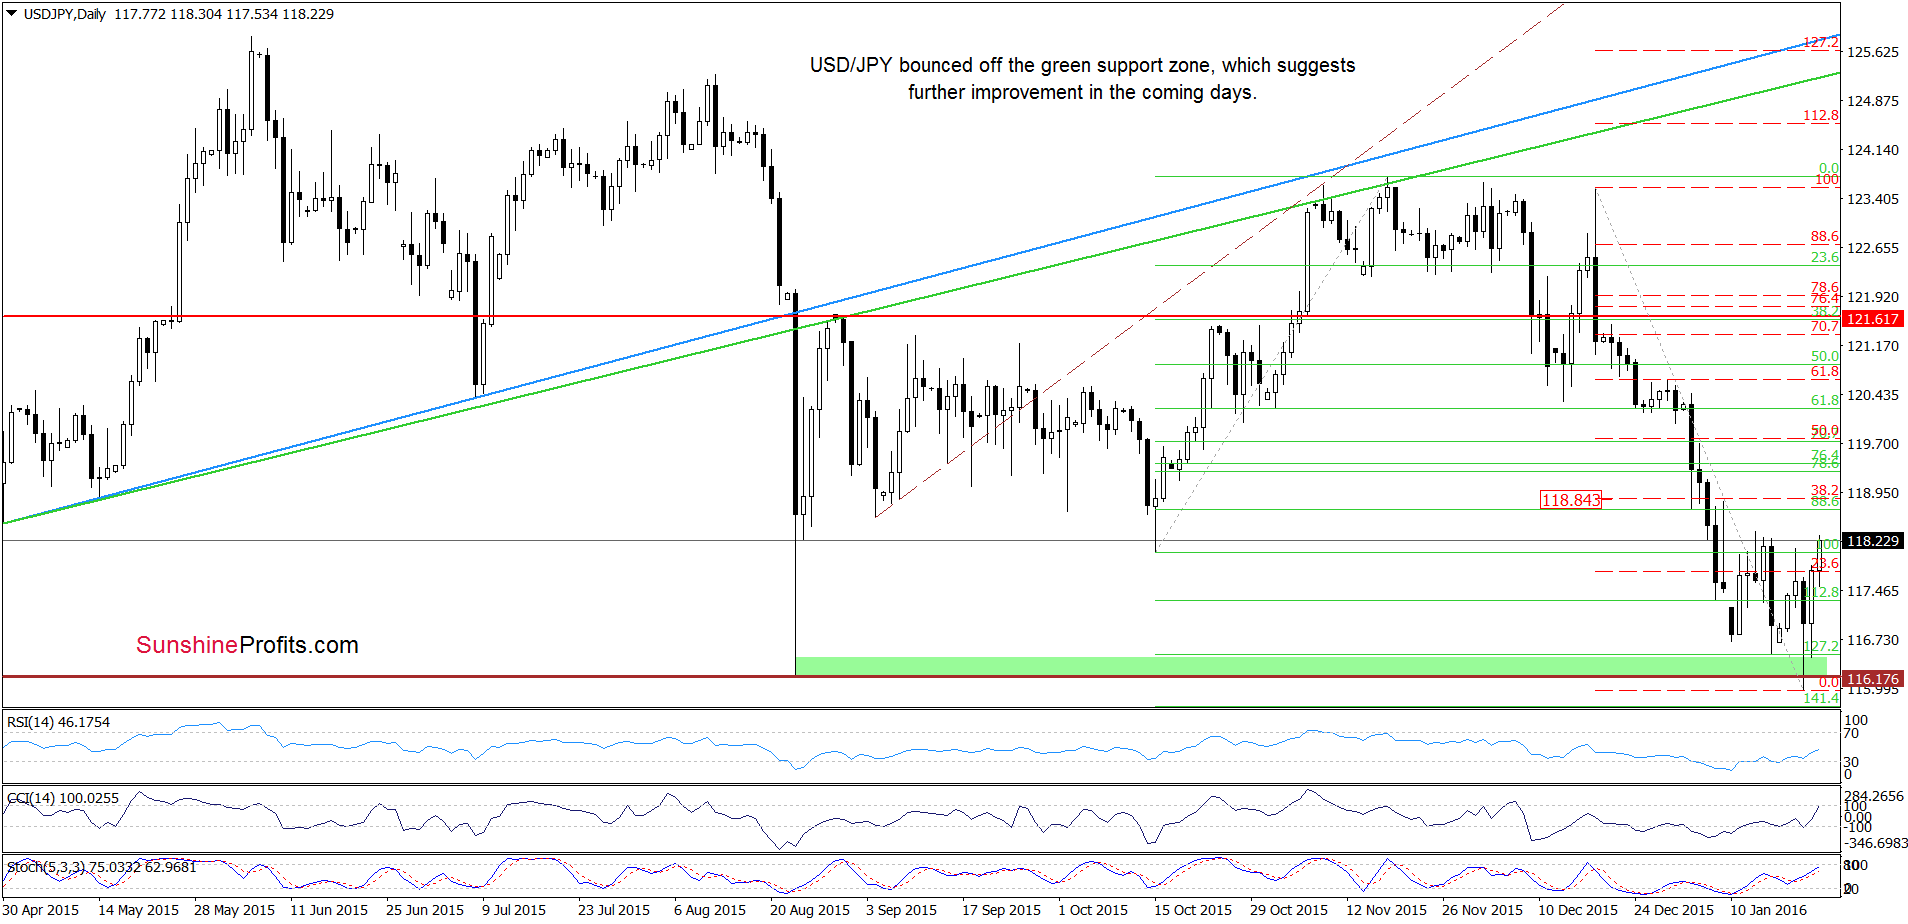 USD/JPY - the daily chart